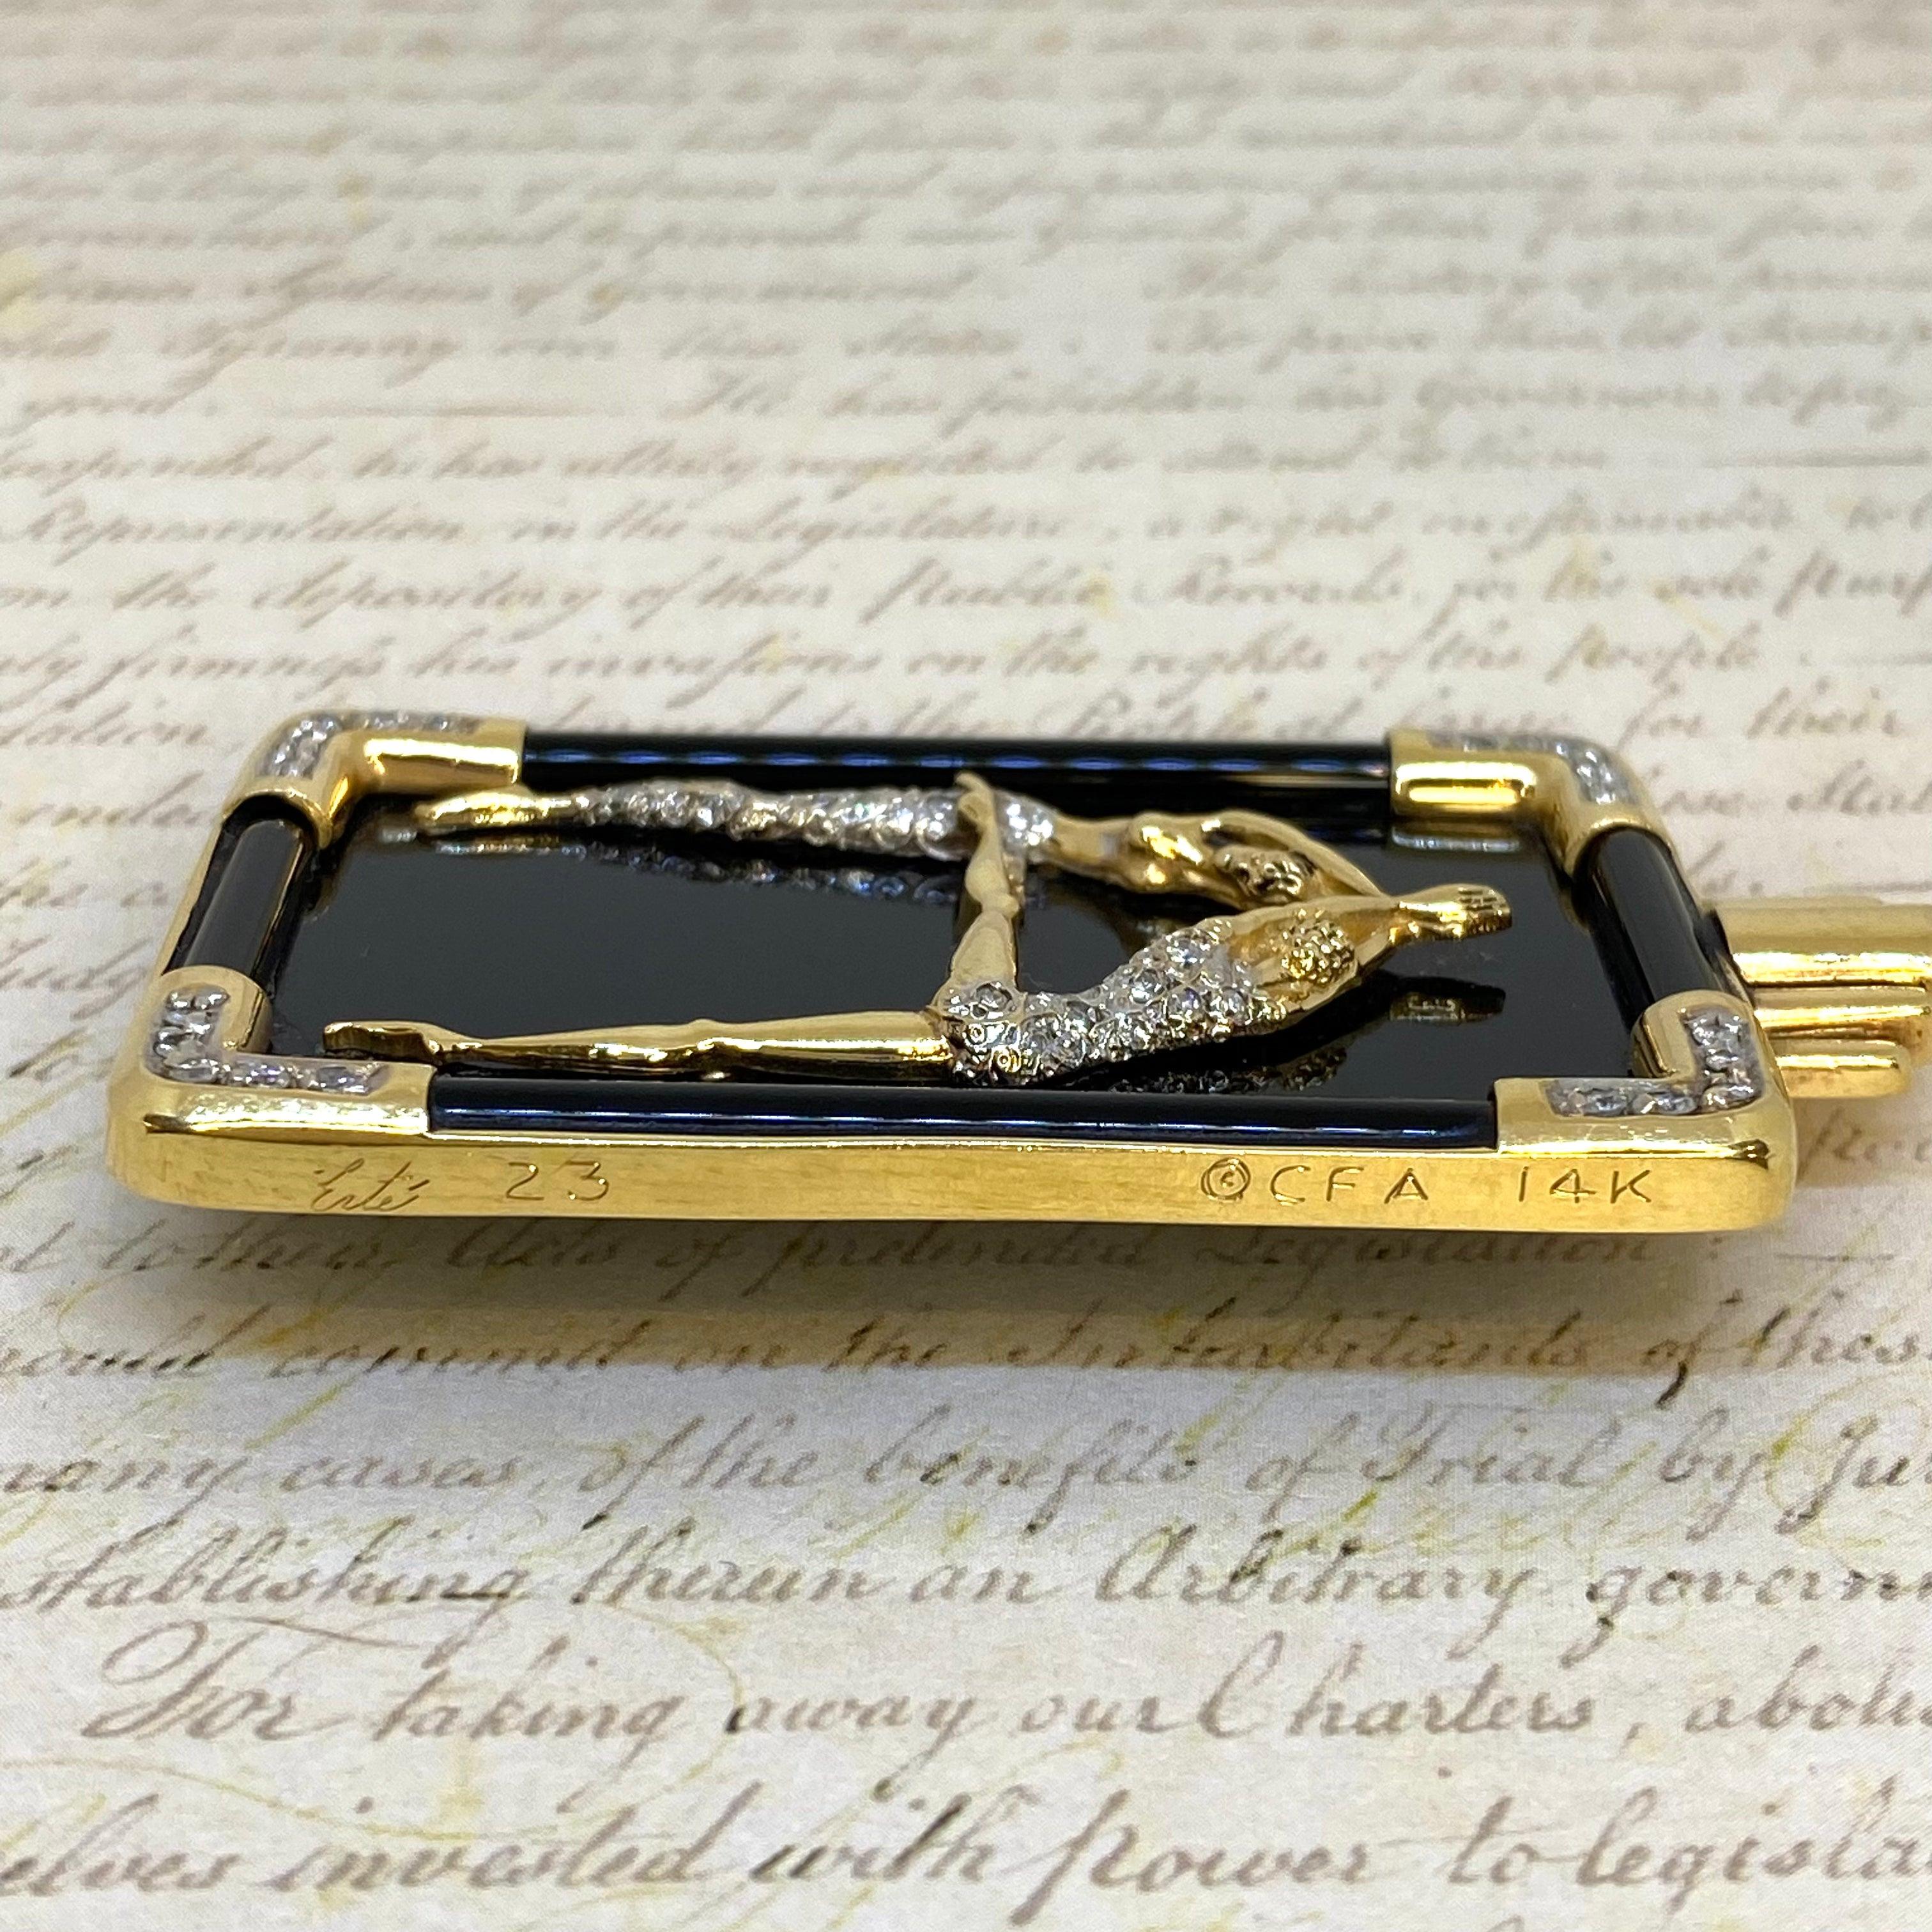 Amazing Erte' black onyx and diamond brooch, featuring the letter 